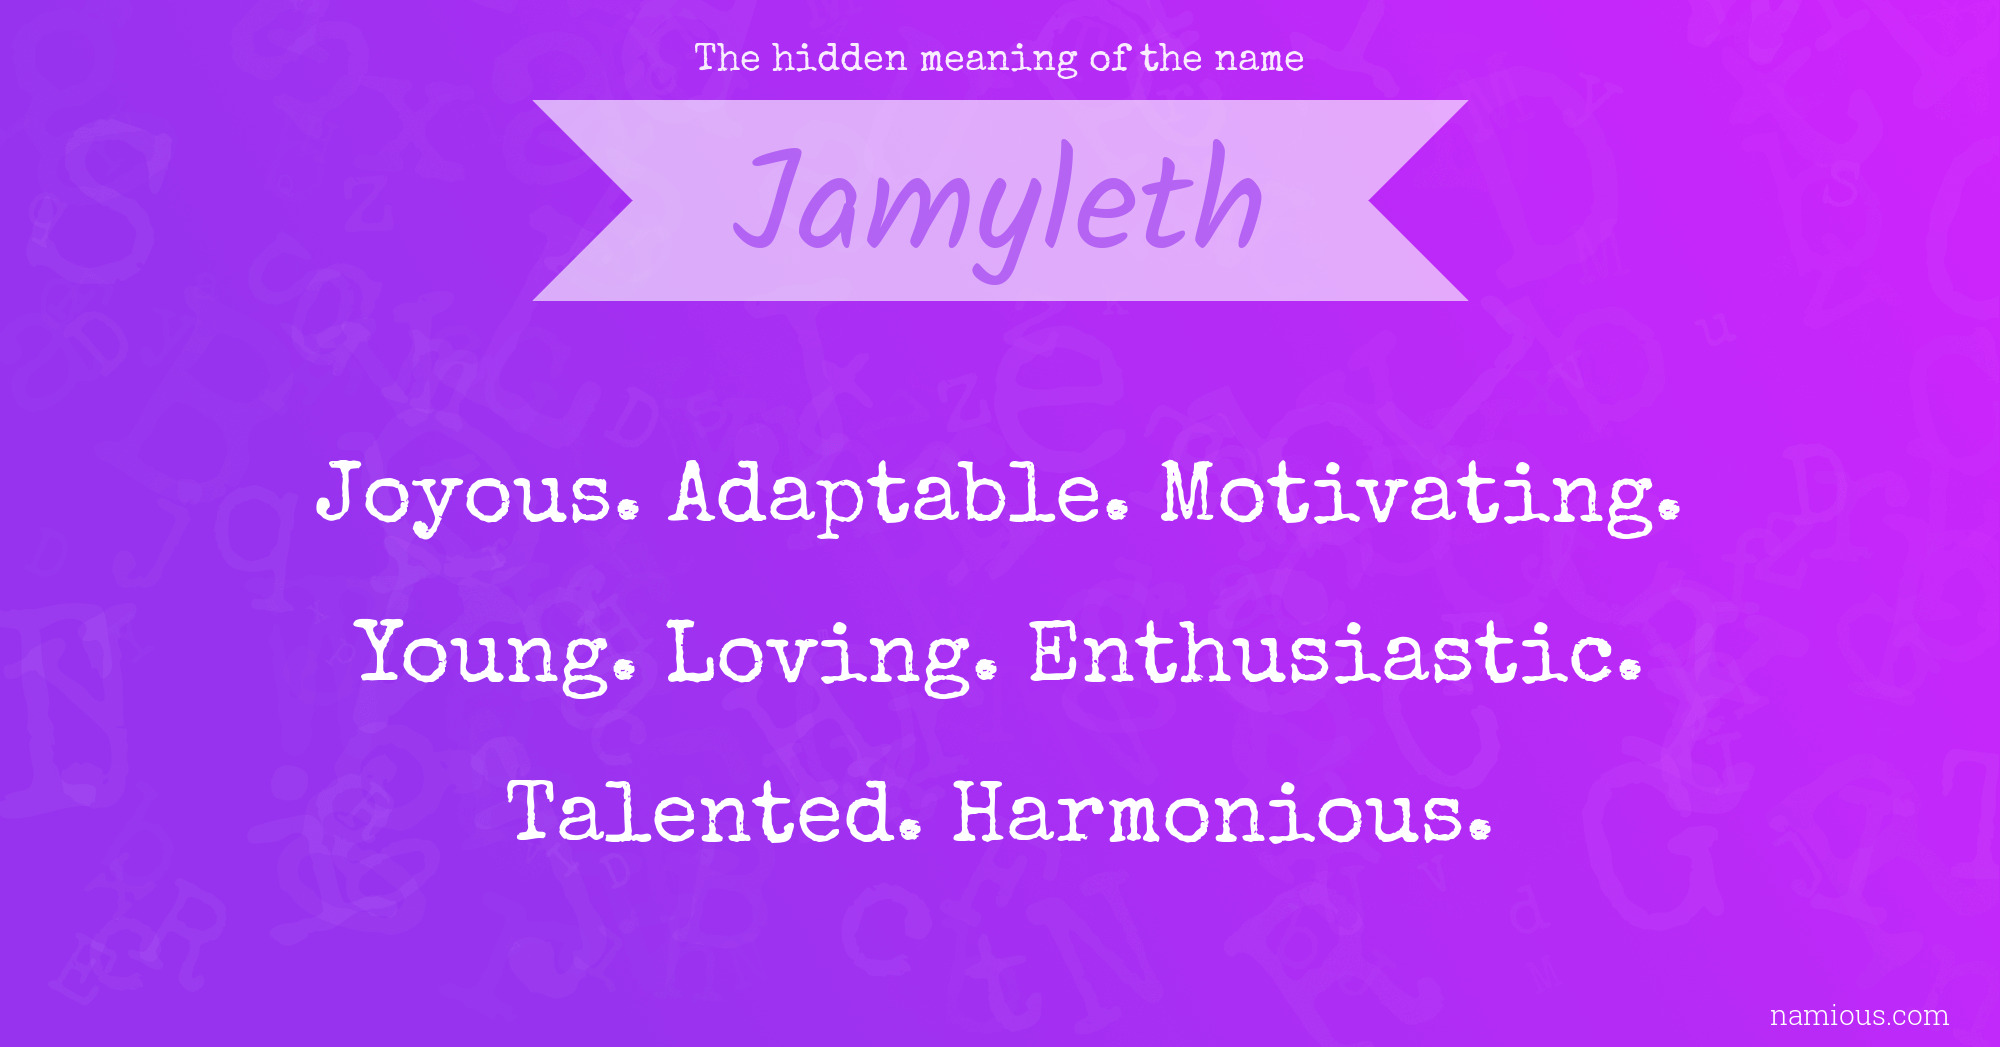 The hidden meaning of the name Jamyleth